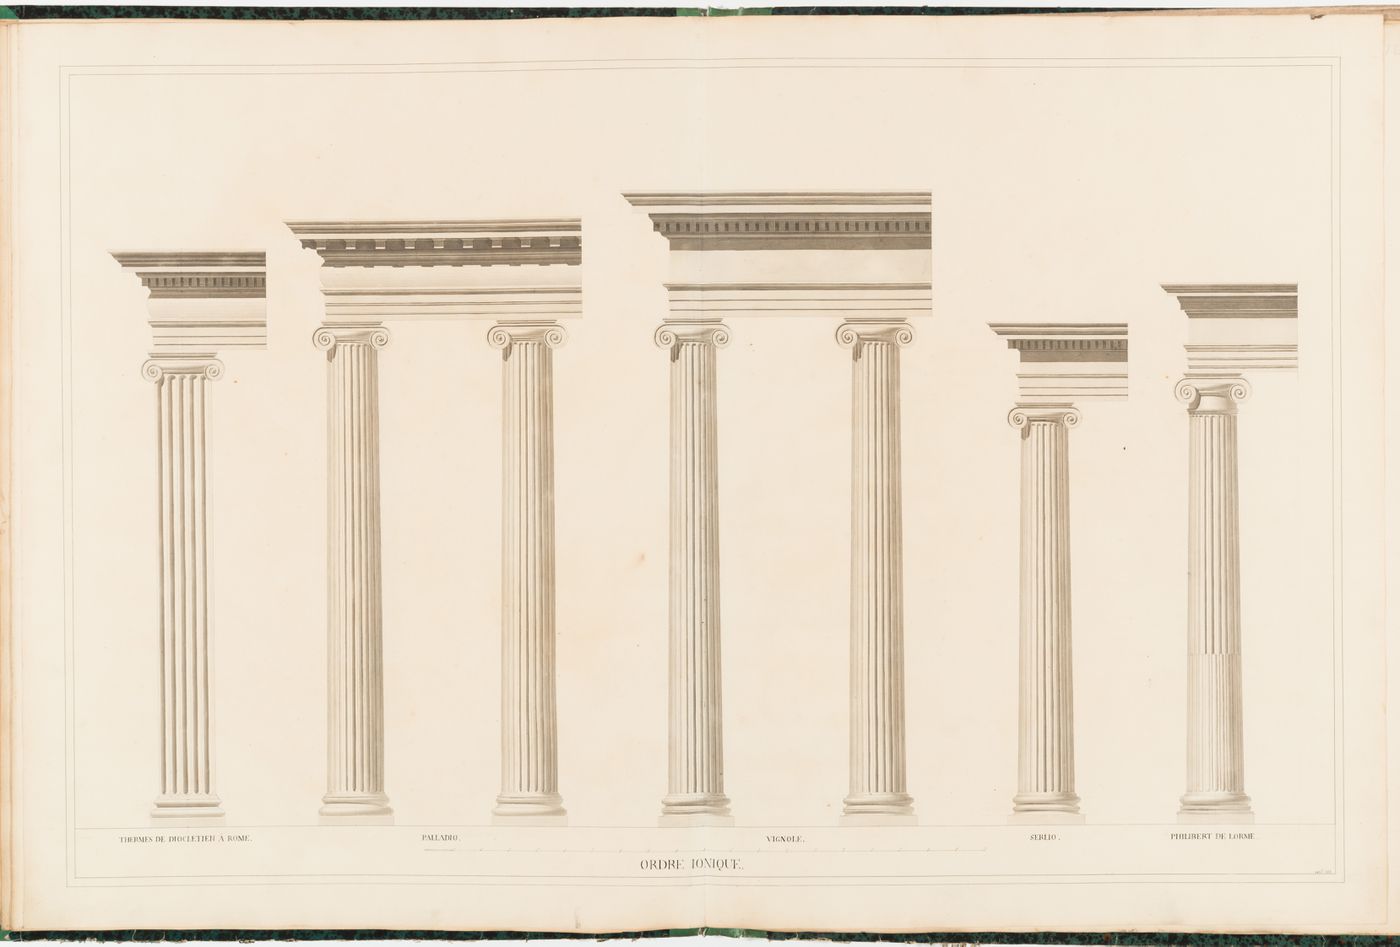 Elevations of Ionic columns and entablatures after Palladio, Vignola, Serlio, Delorme, and from the Terme di Diocleziano, Rome